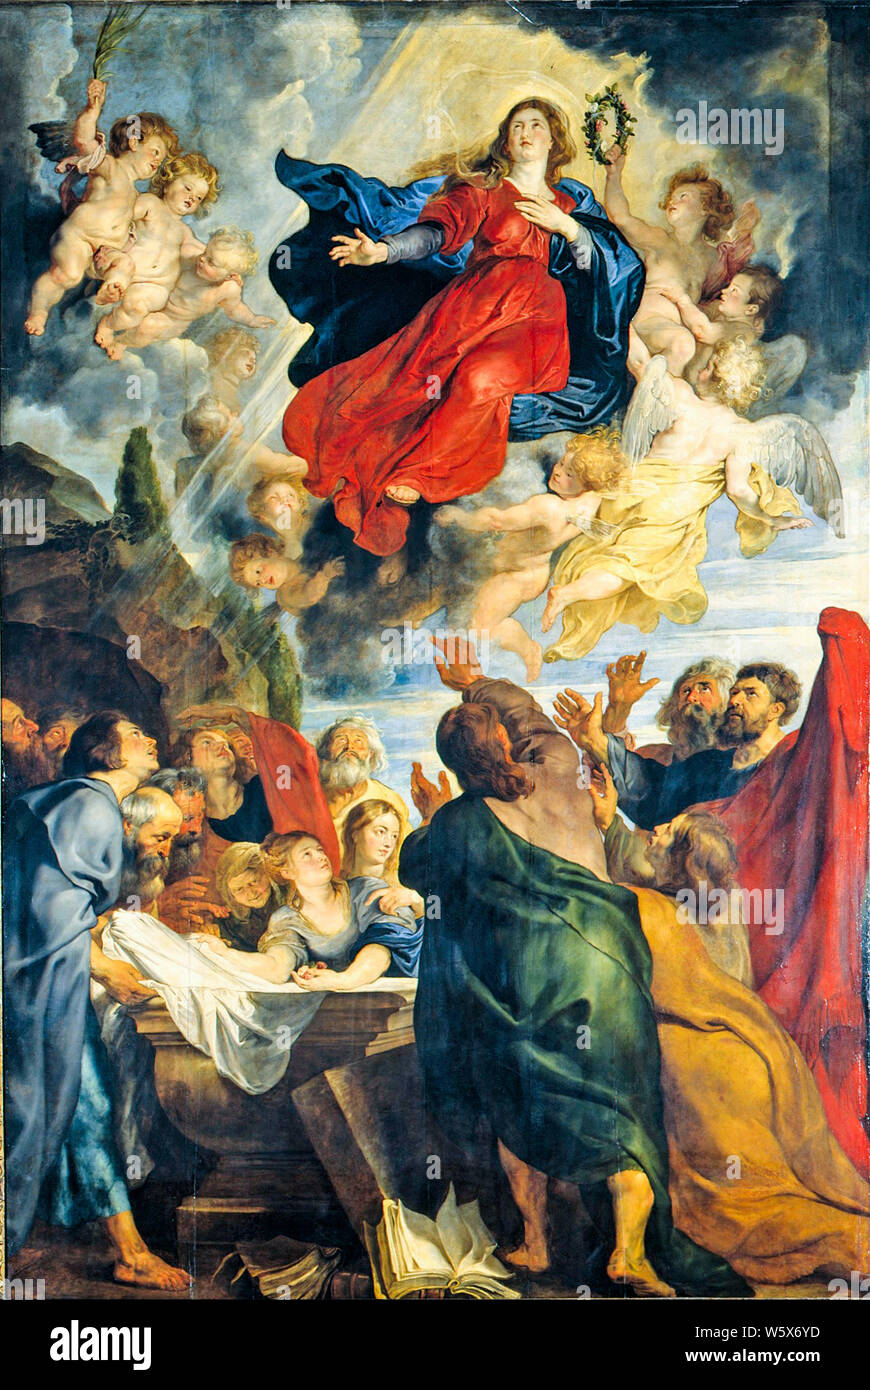 Peter Paul Rubens, painting, Assumption of the Virgin Mary, 1616-1618 Stock Photo